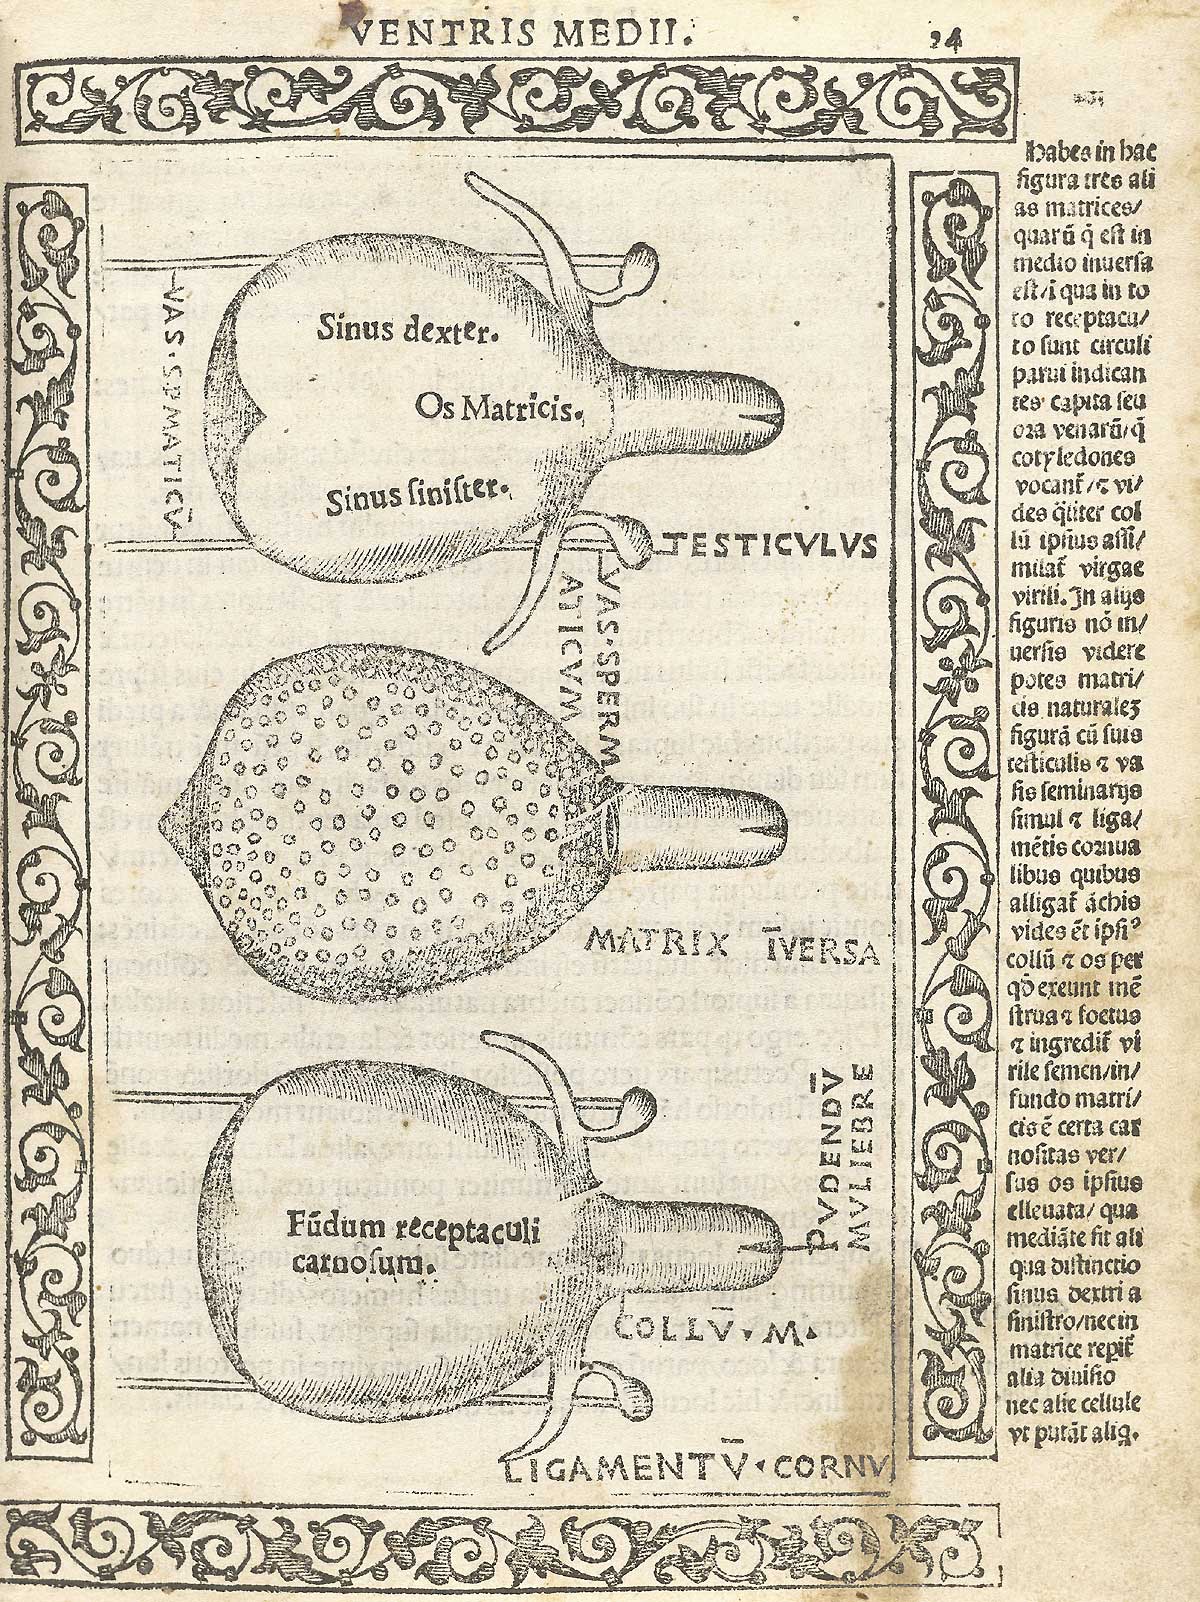 Three woodcuts of the uterus showing the anatomy of the uterus and ovaries, including the exterior of the uterus and the interior, the cervix, and the vagina; with a woodcut border and text in Latin on the right side of page, from Berengario da Carpi’s Isagogae breues, Bologna, 1523, NLM Call no. WZ 240 B488i 1523.